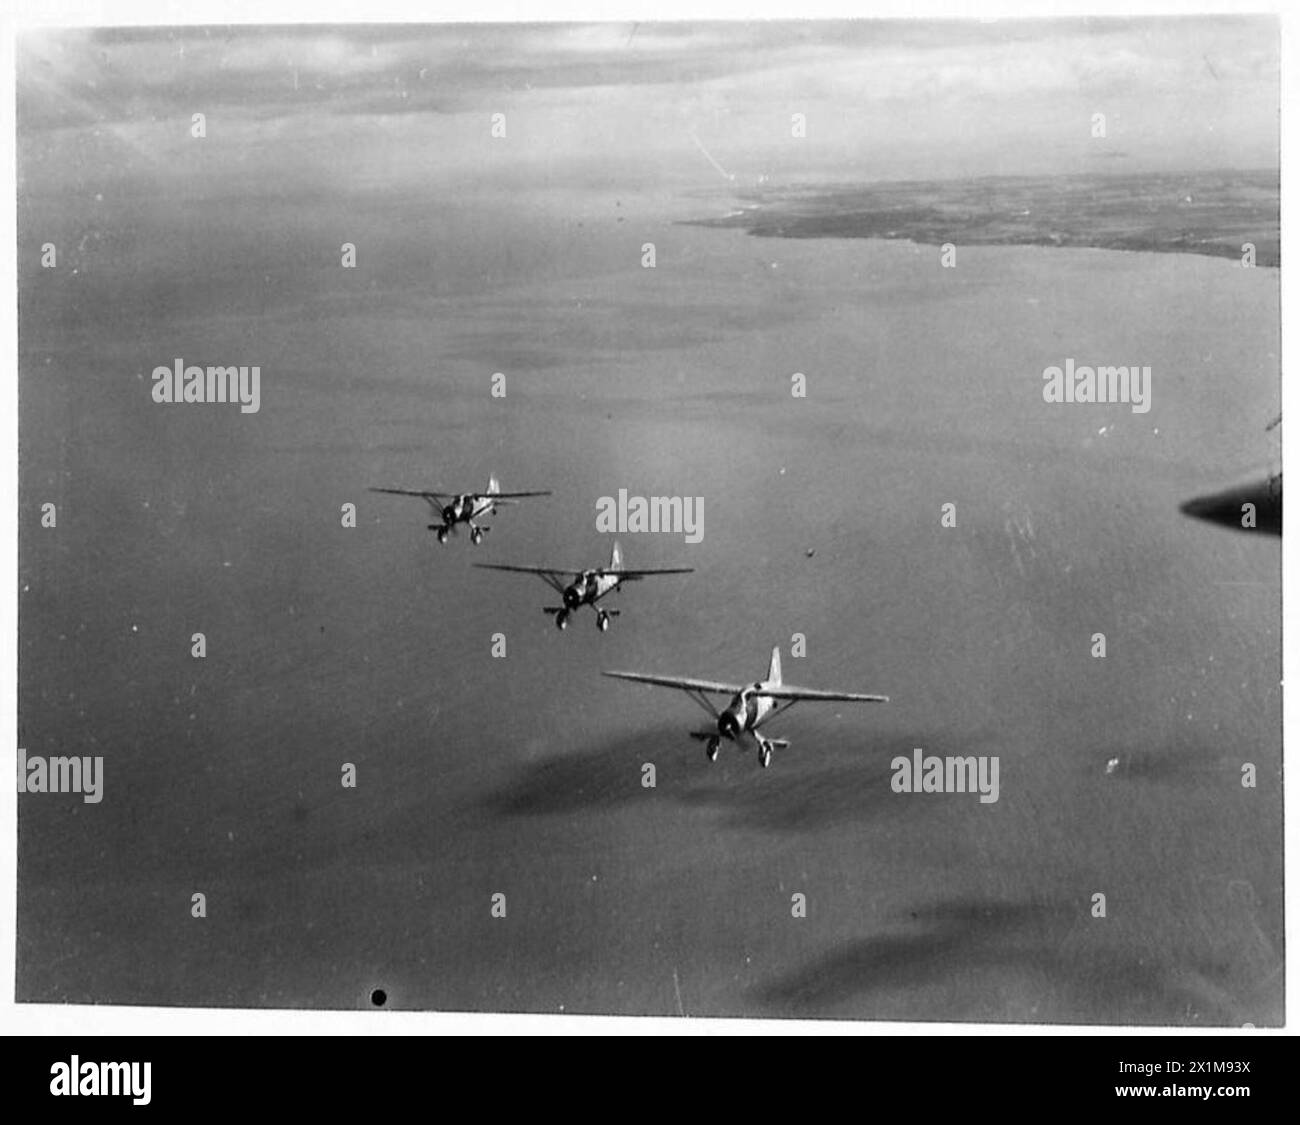 THE POLISH AIR FORCE IN BRITAIN, 1940-1947 - Three Westland Lysander Mark IIIAs of No. 309 Polish Fighter-Reconnaissance Squadron (part of the RAF Army Cooperation Command), based at Dunino, Fife, on a photo reconnaissance training sortie over Scottish coast, Polish Air Force, Polish Air Force, 309 'Land of Czerwień' Fighter-Reconnaissance Squadron, Royal Air Force, Station, Calveley Stock Photo